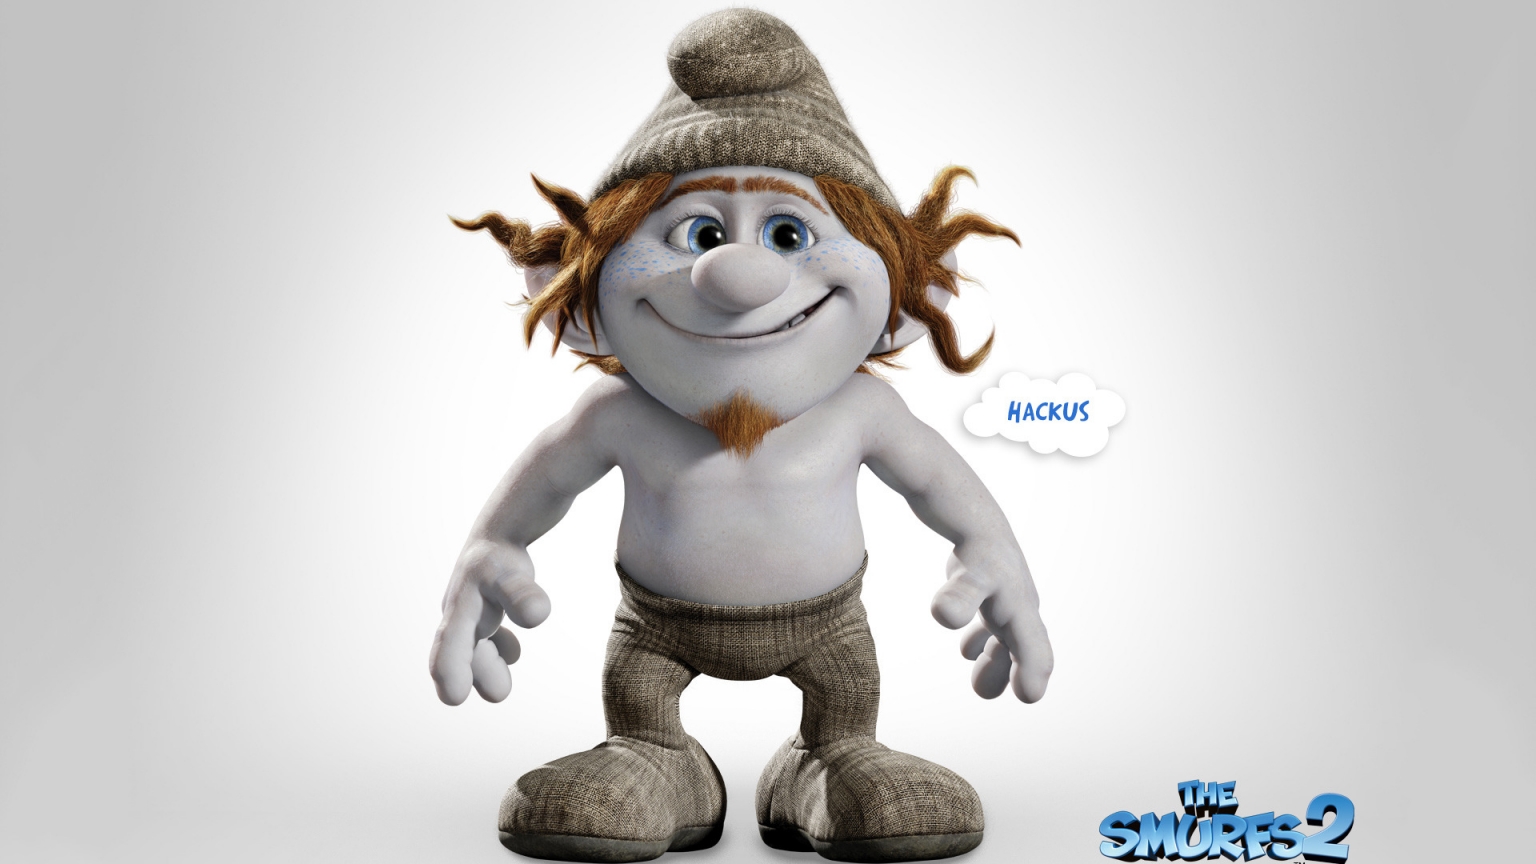 Hachus The Smurfs 2 for 1536 x 864 HDTV resolution